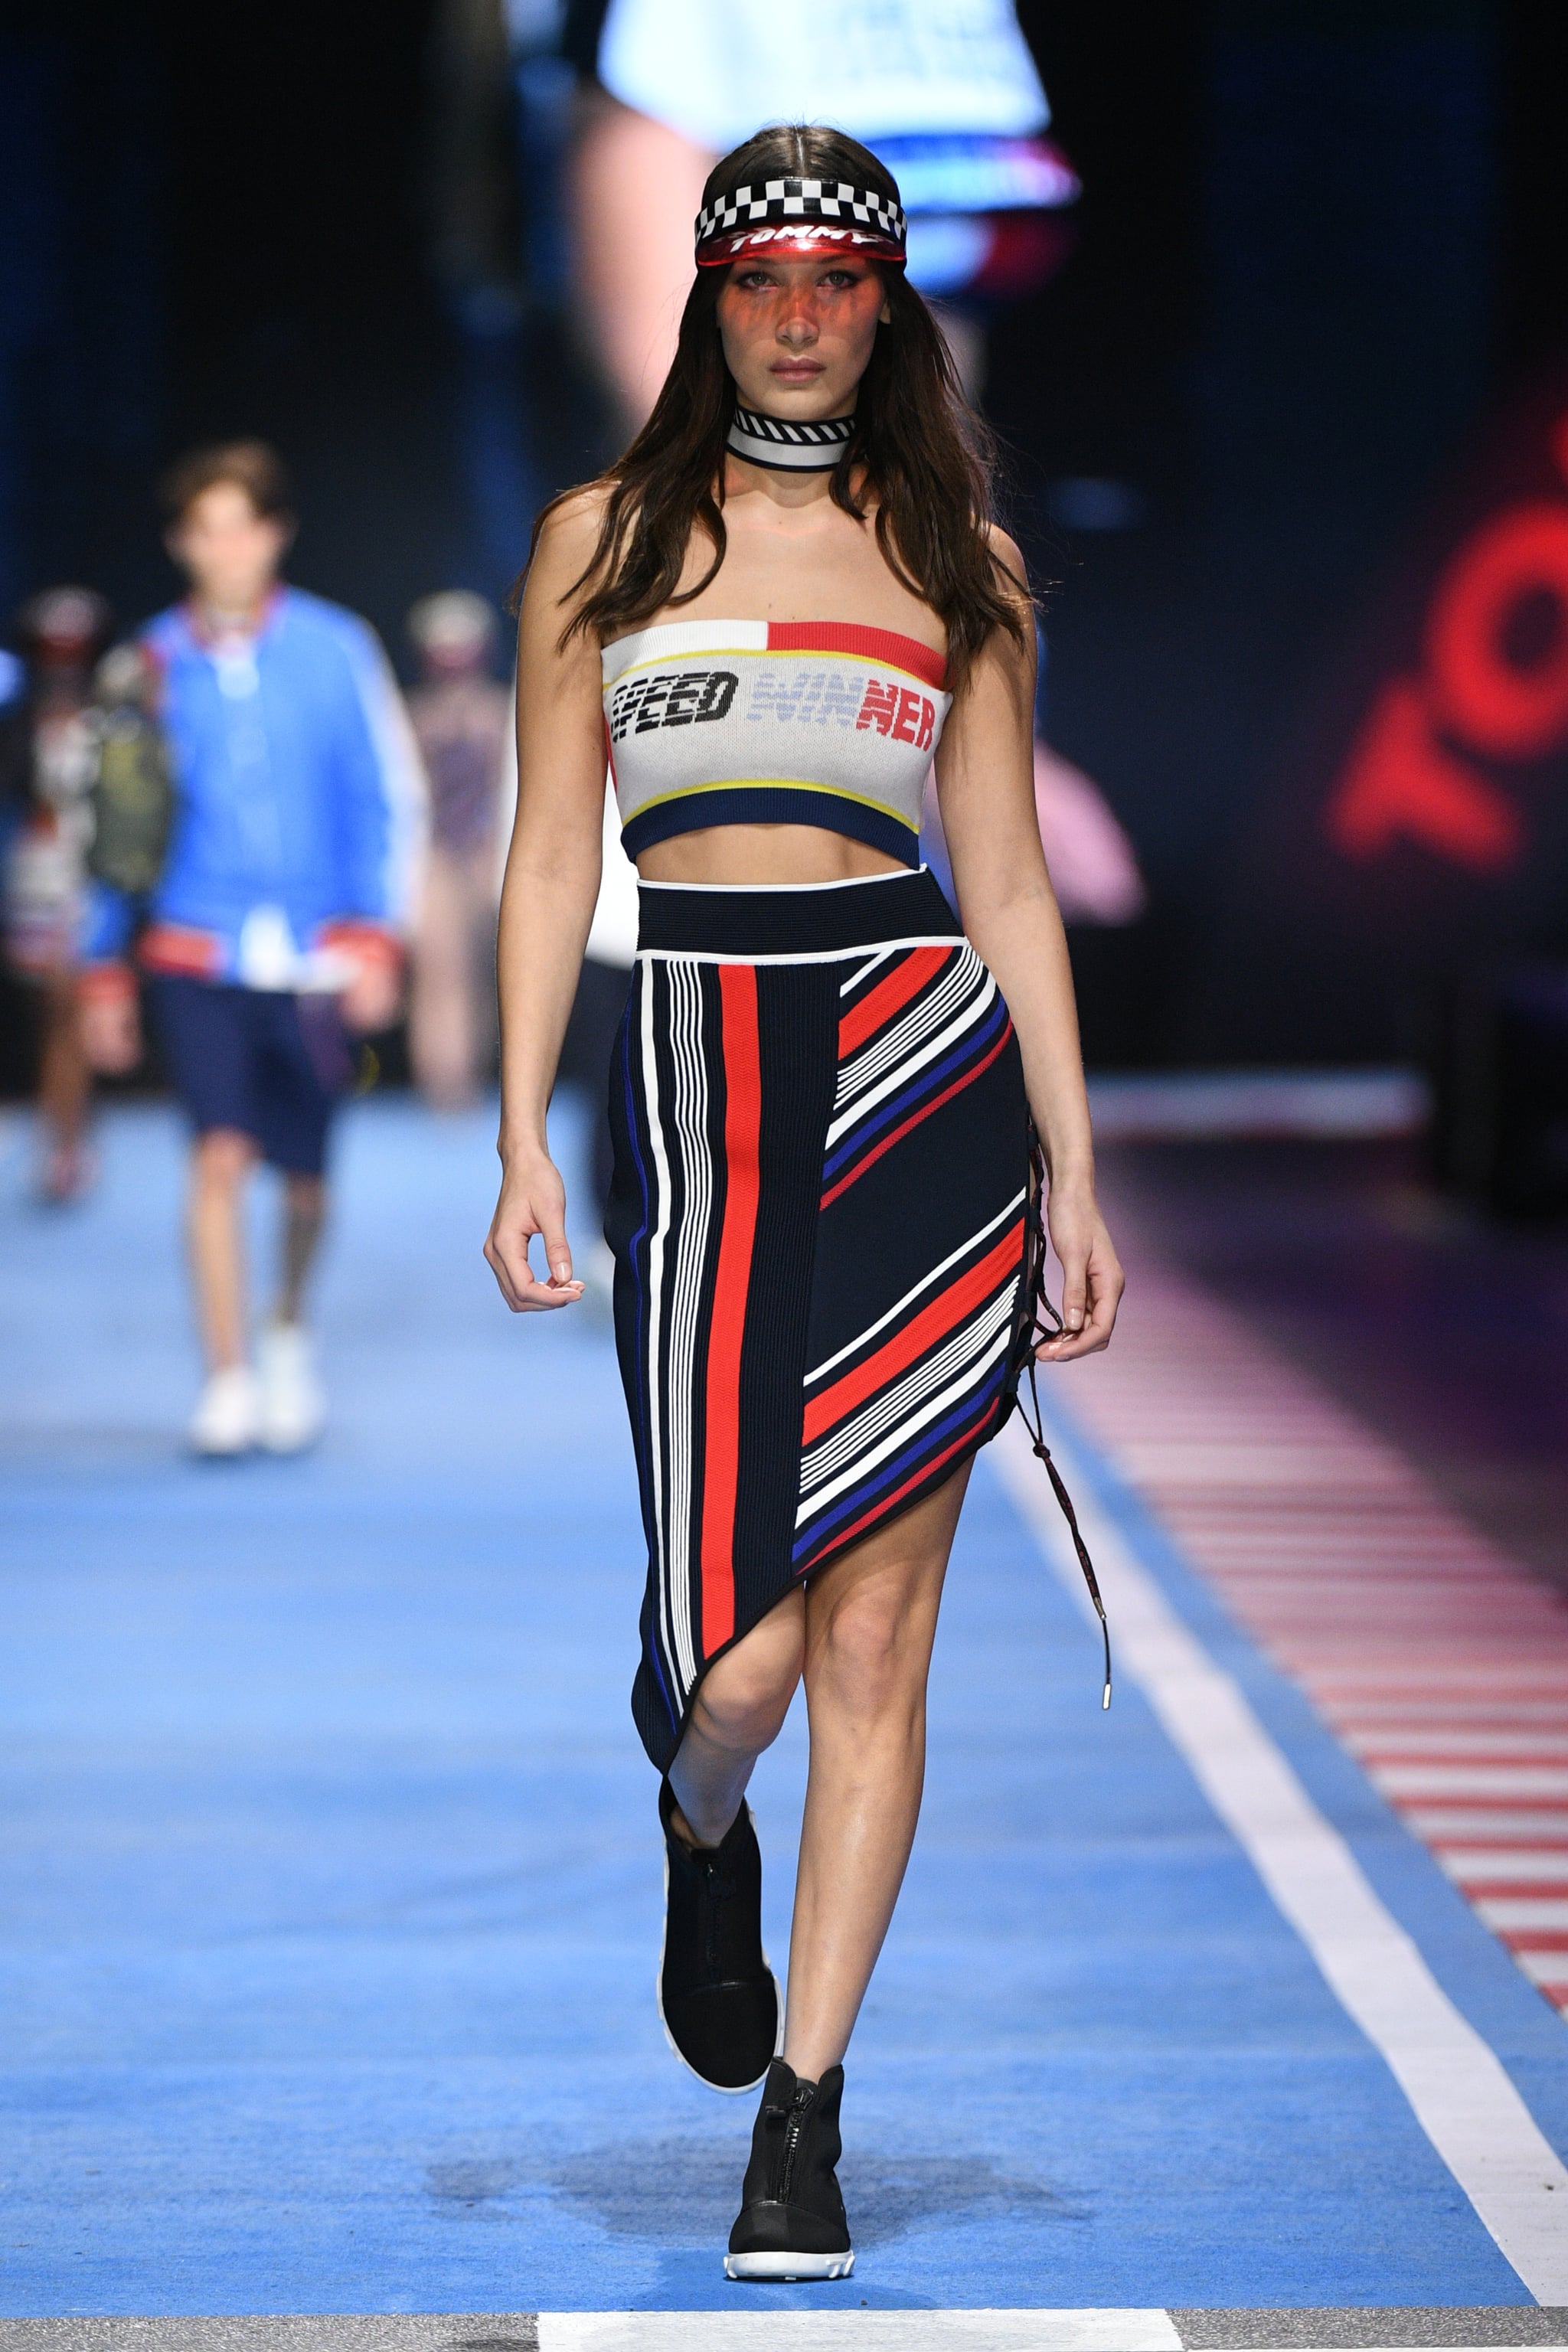 Fashion, Shopping & Style | All 3 Hadid Siblings Hit the Runway For Tommy Hilfiger and the F1-Inspired Collection Will Drive Wild POPSUGAR Fashion Middle East Photo 2